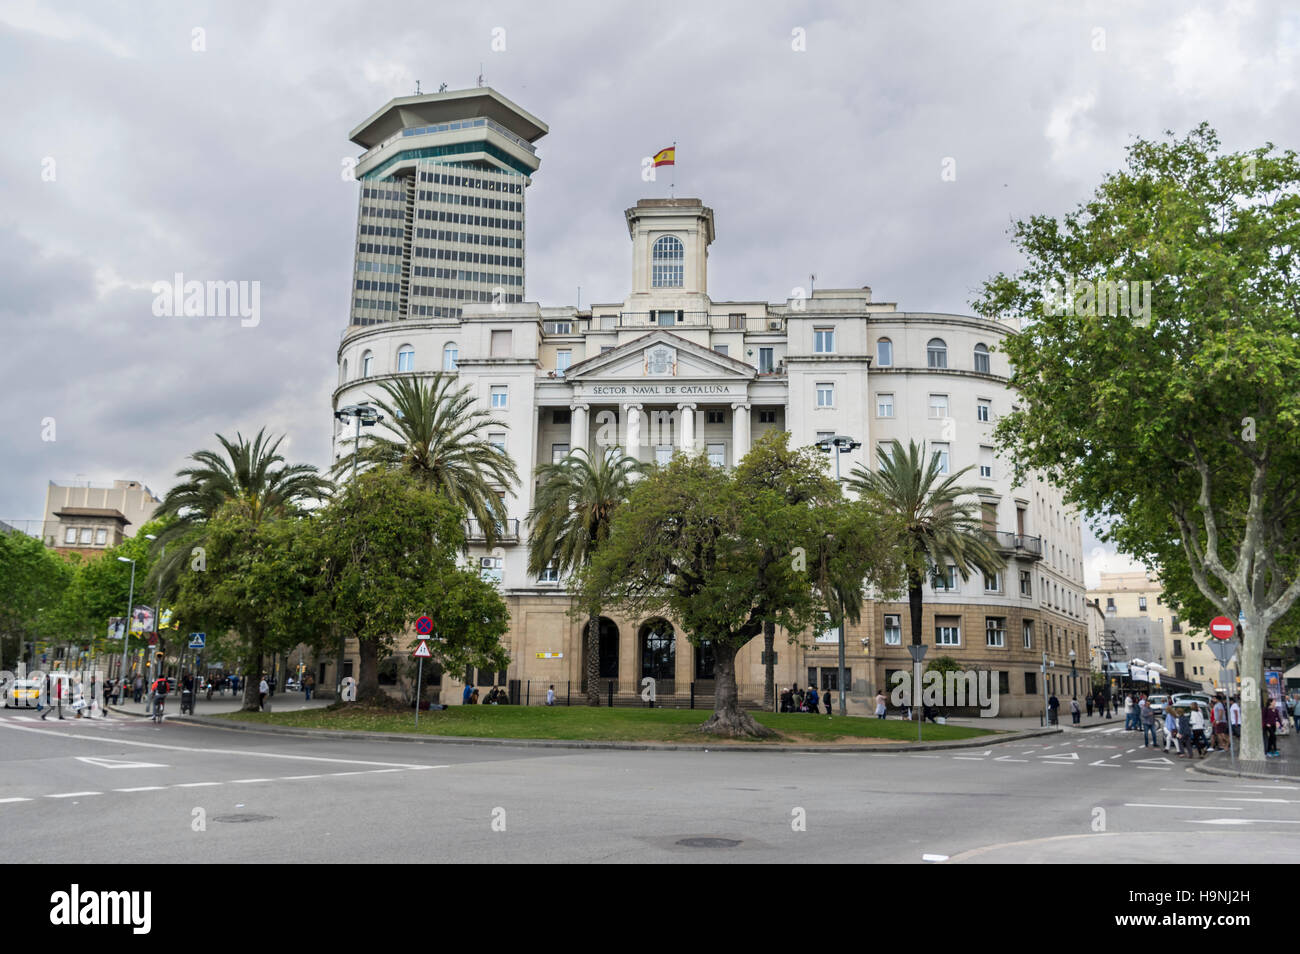 Sector Naval de Cataluña building in Barcelona, Catalonia, Spain, on a cloudy day. Stock Photo